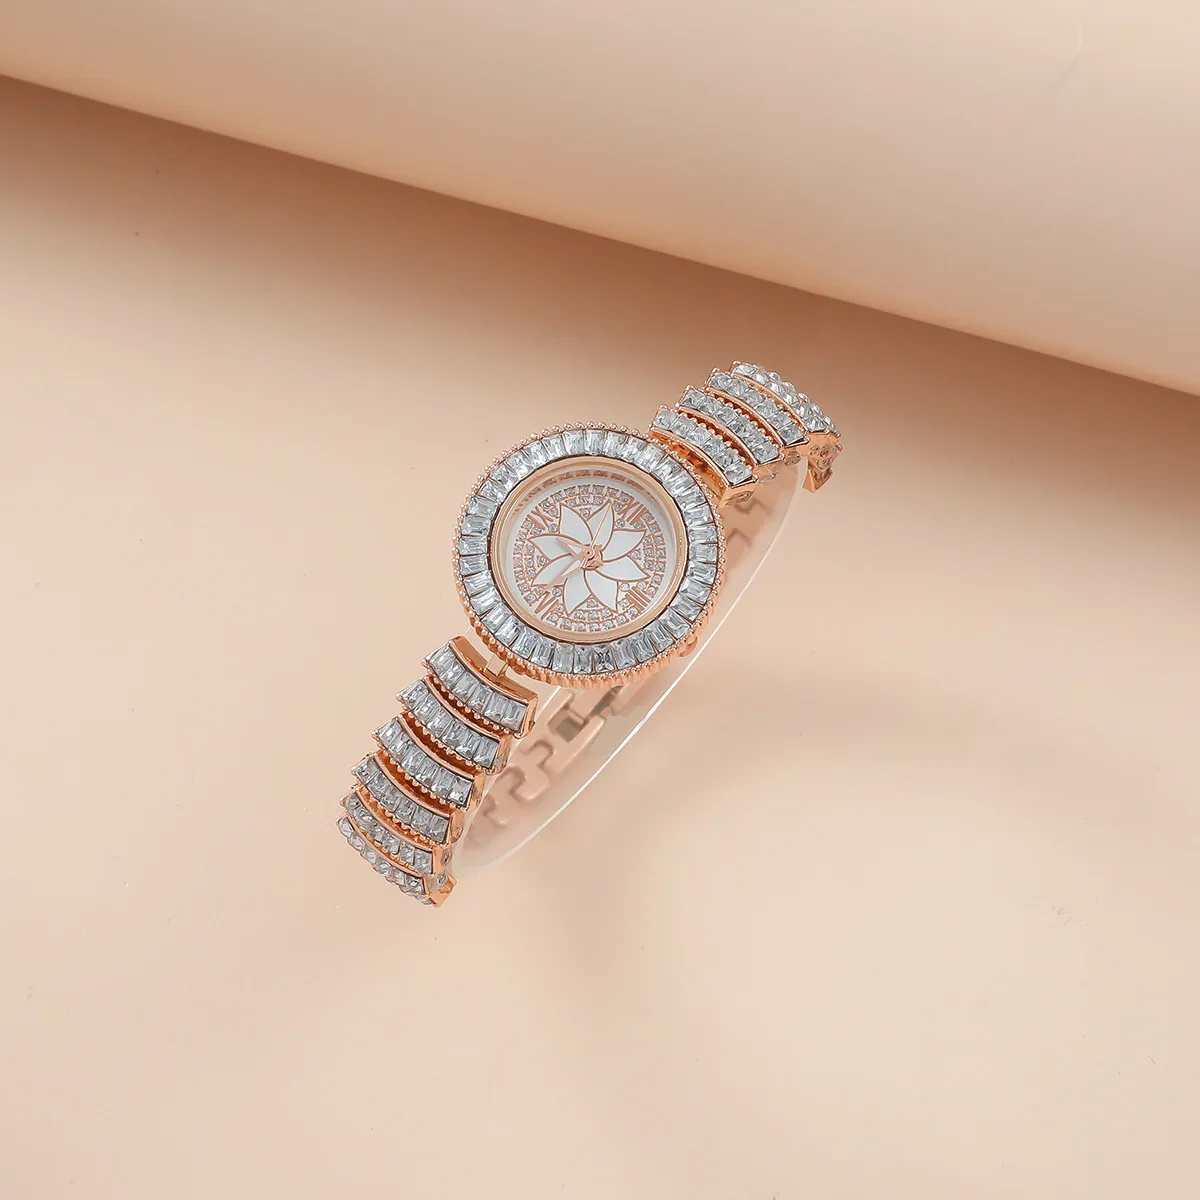 

CHA-002 High quality luxury full diamond women's watch,made of steel strip material that does not rust or fade, free of shipping